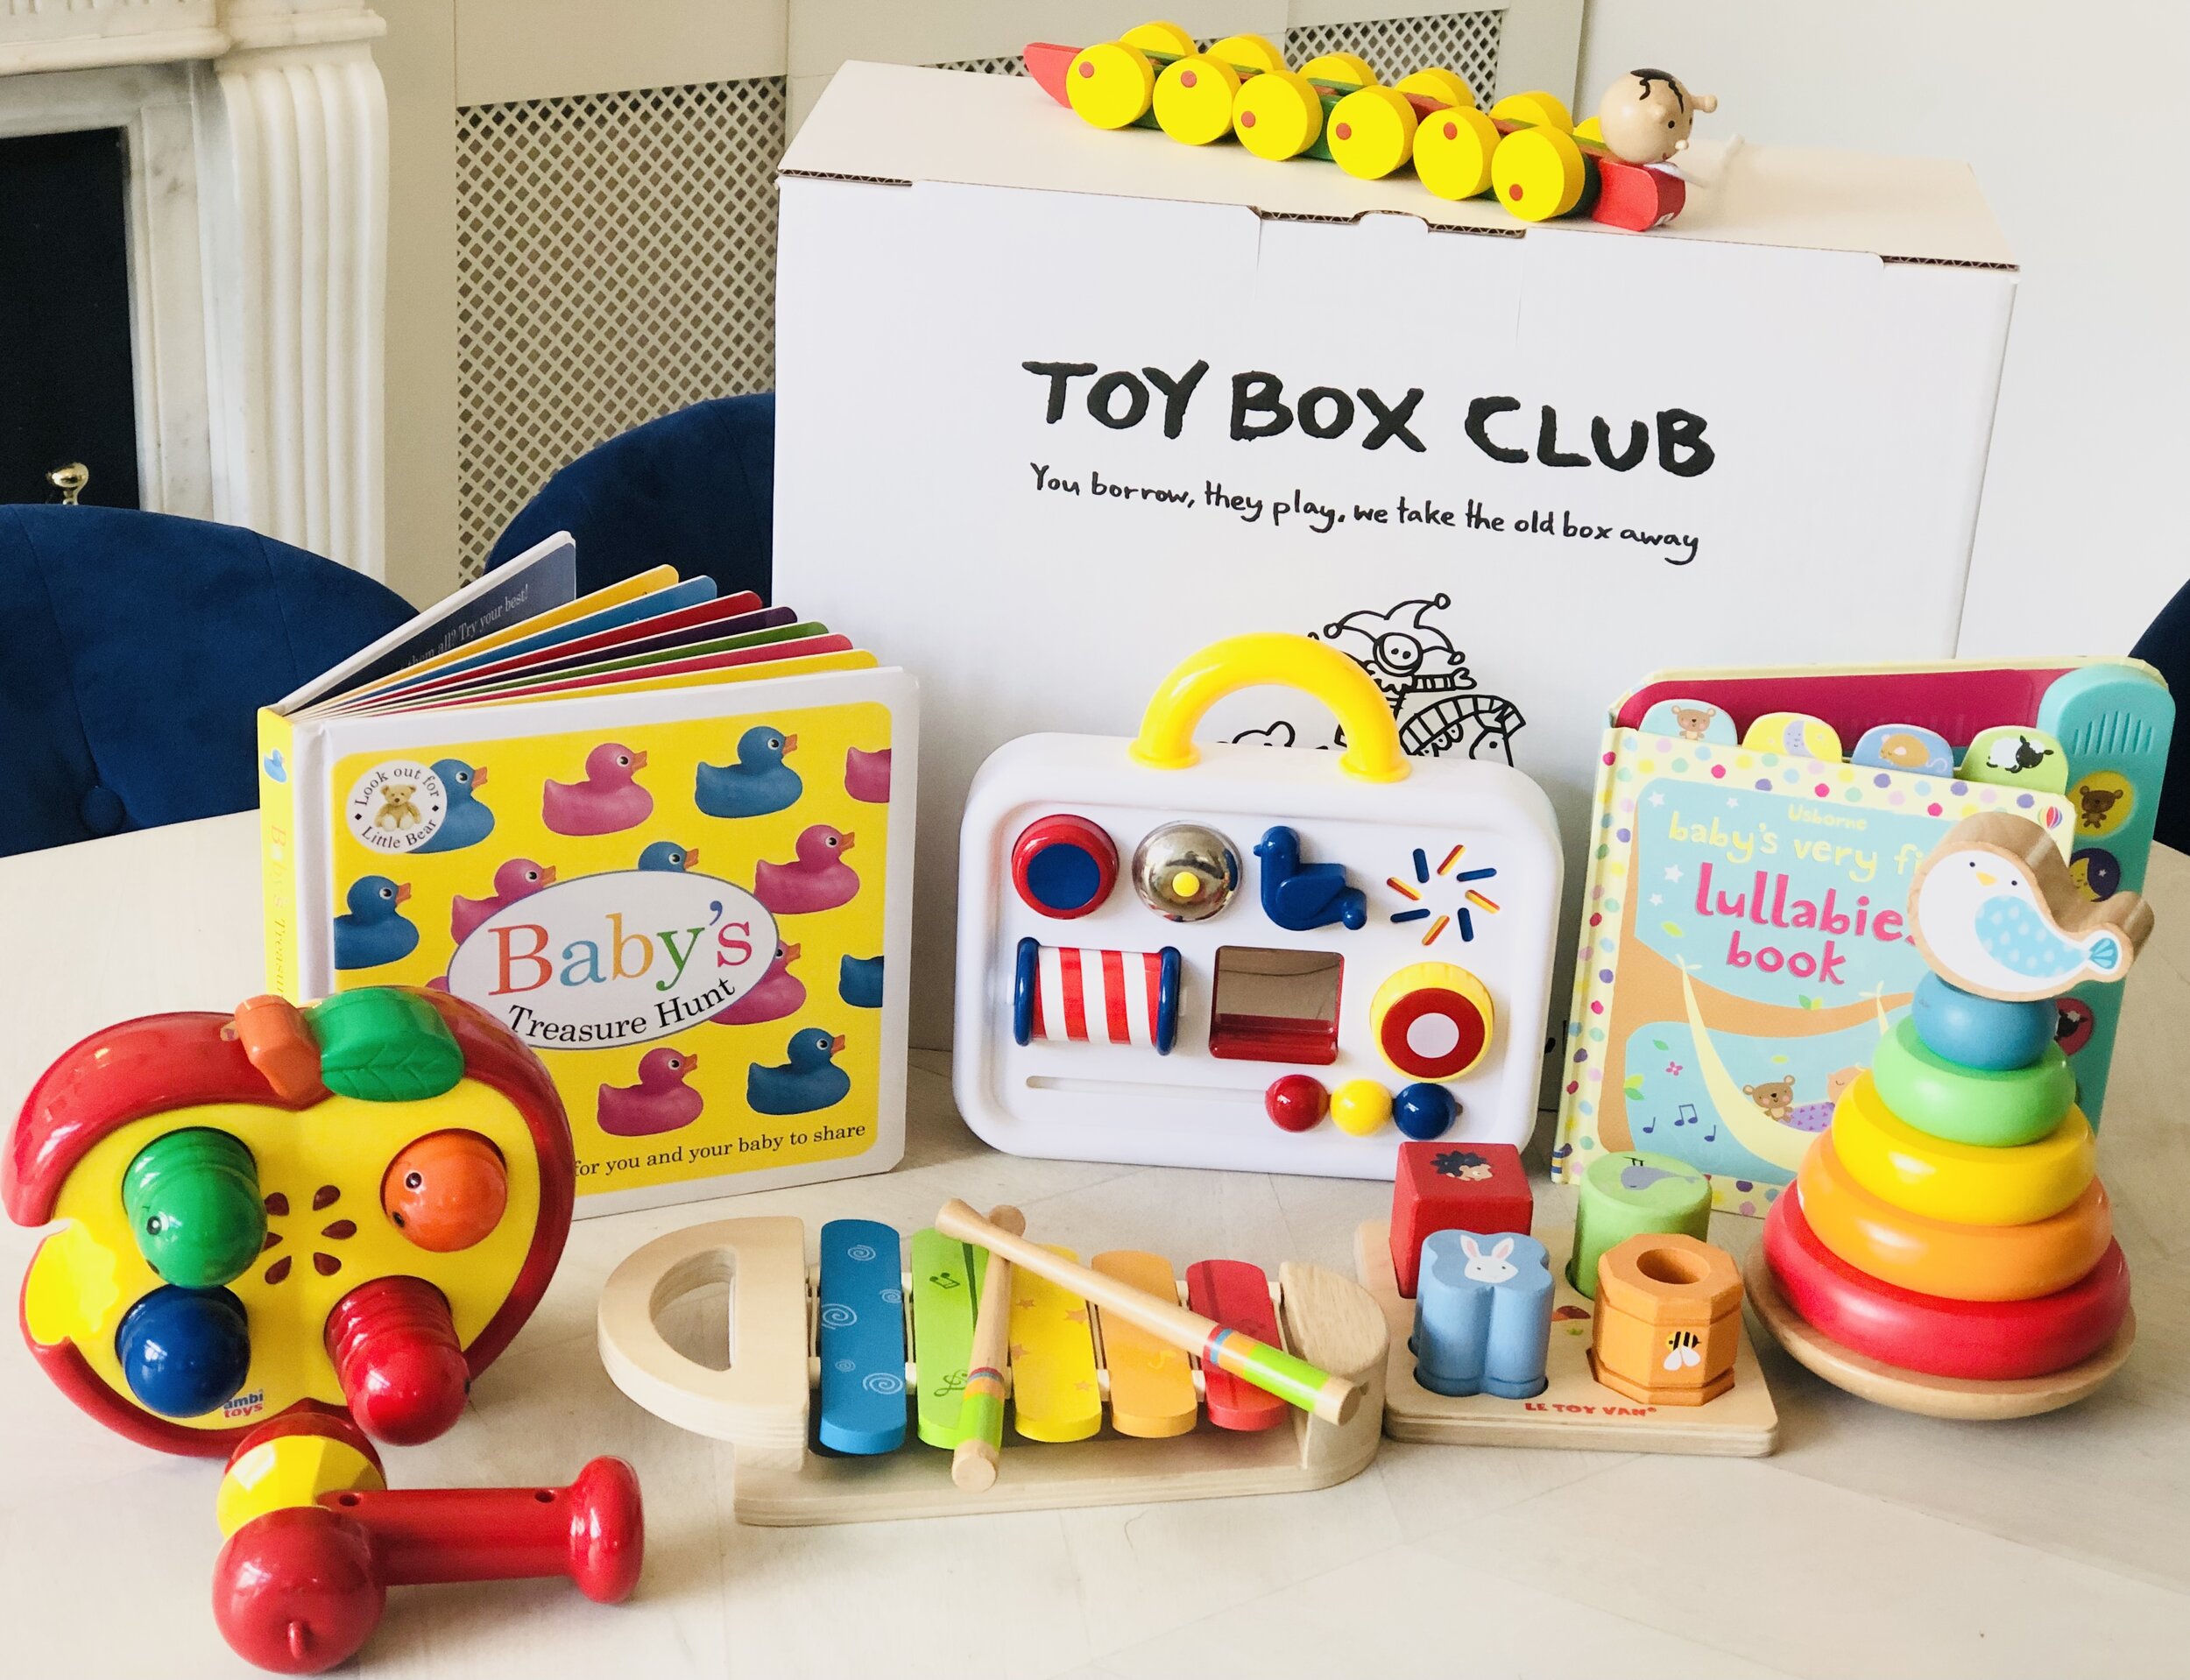 Toy box club, story books, kids toys, xylophone, rings, infant educational toys